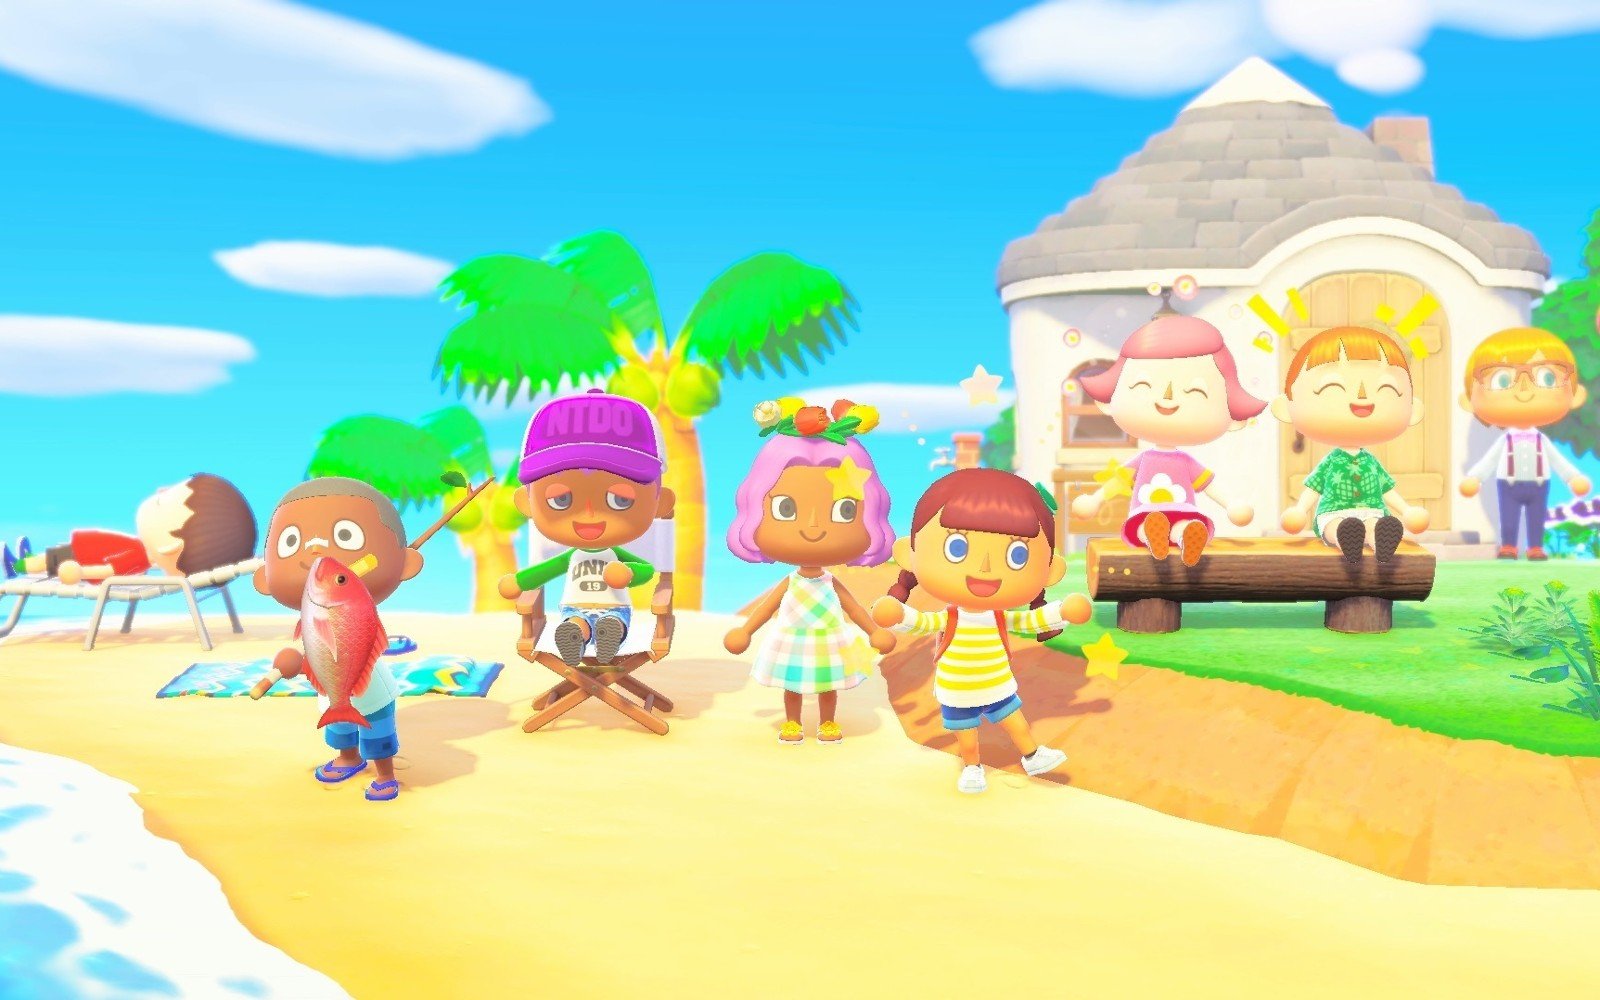 ‘Animal Crossing: Fresh Horizons’ drops to a brand new low of $40